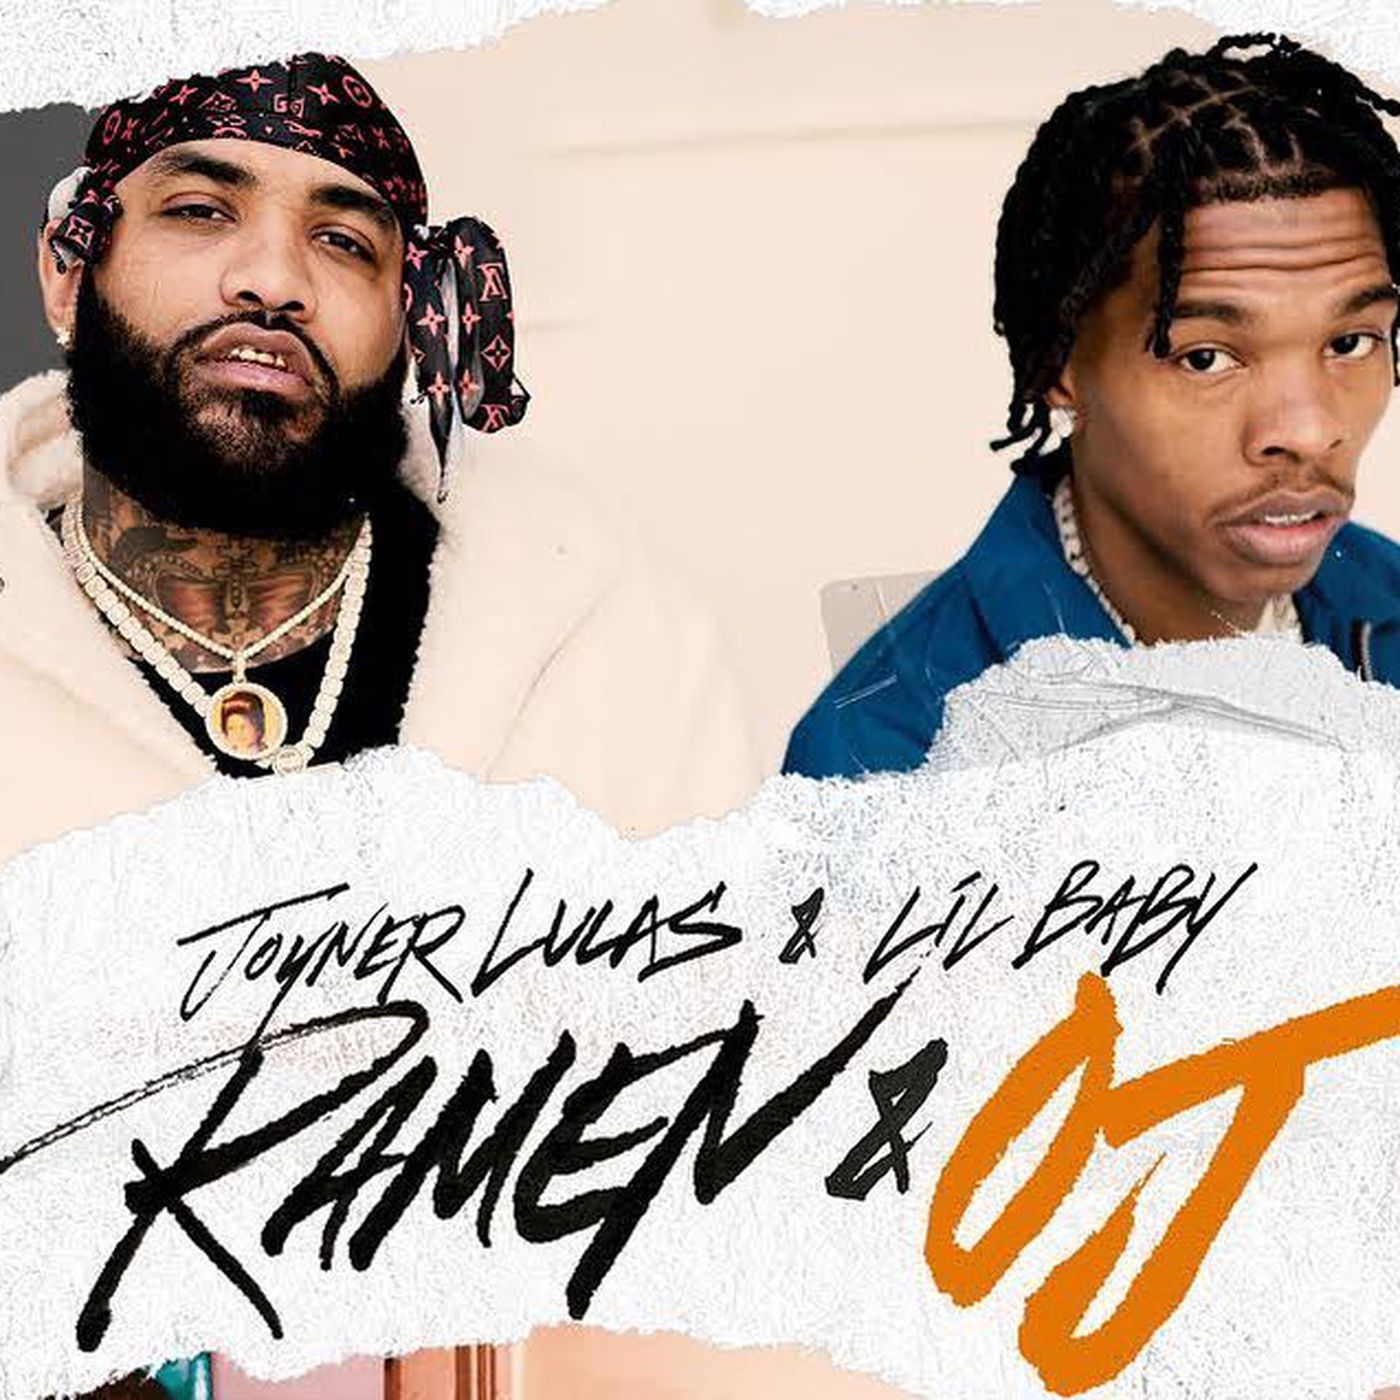 Joyner Lucas teams up with Lil Baby to drop a new music video called "Ramen & OJ"